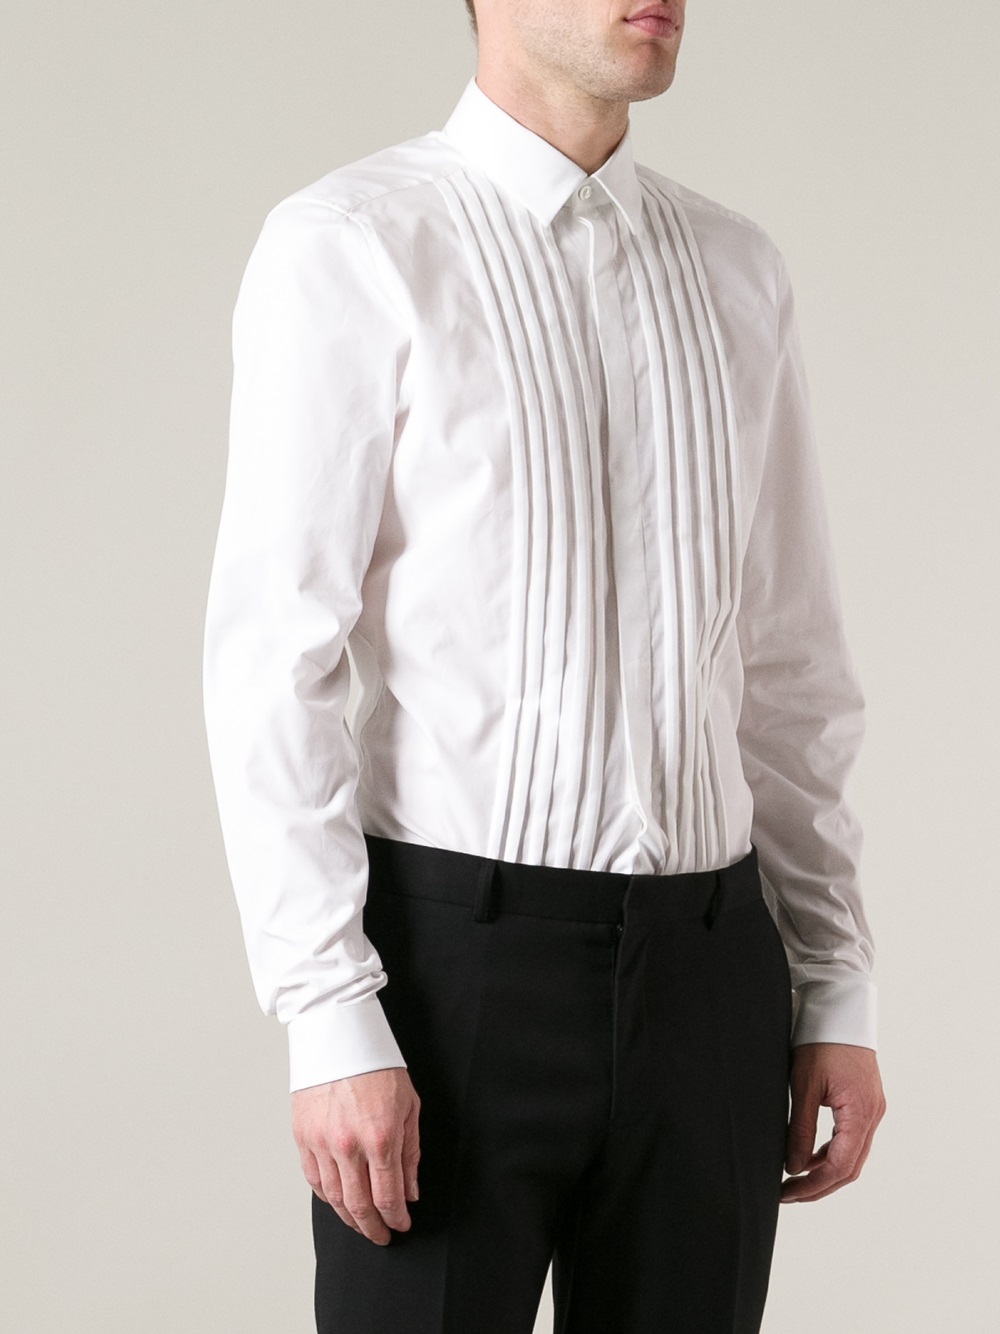 Lyst - Valentino Pleated Shirt in White for Men